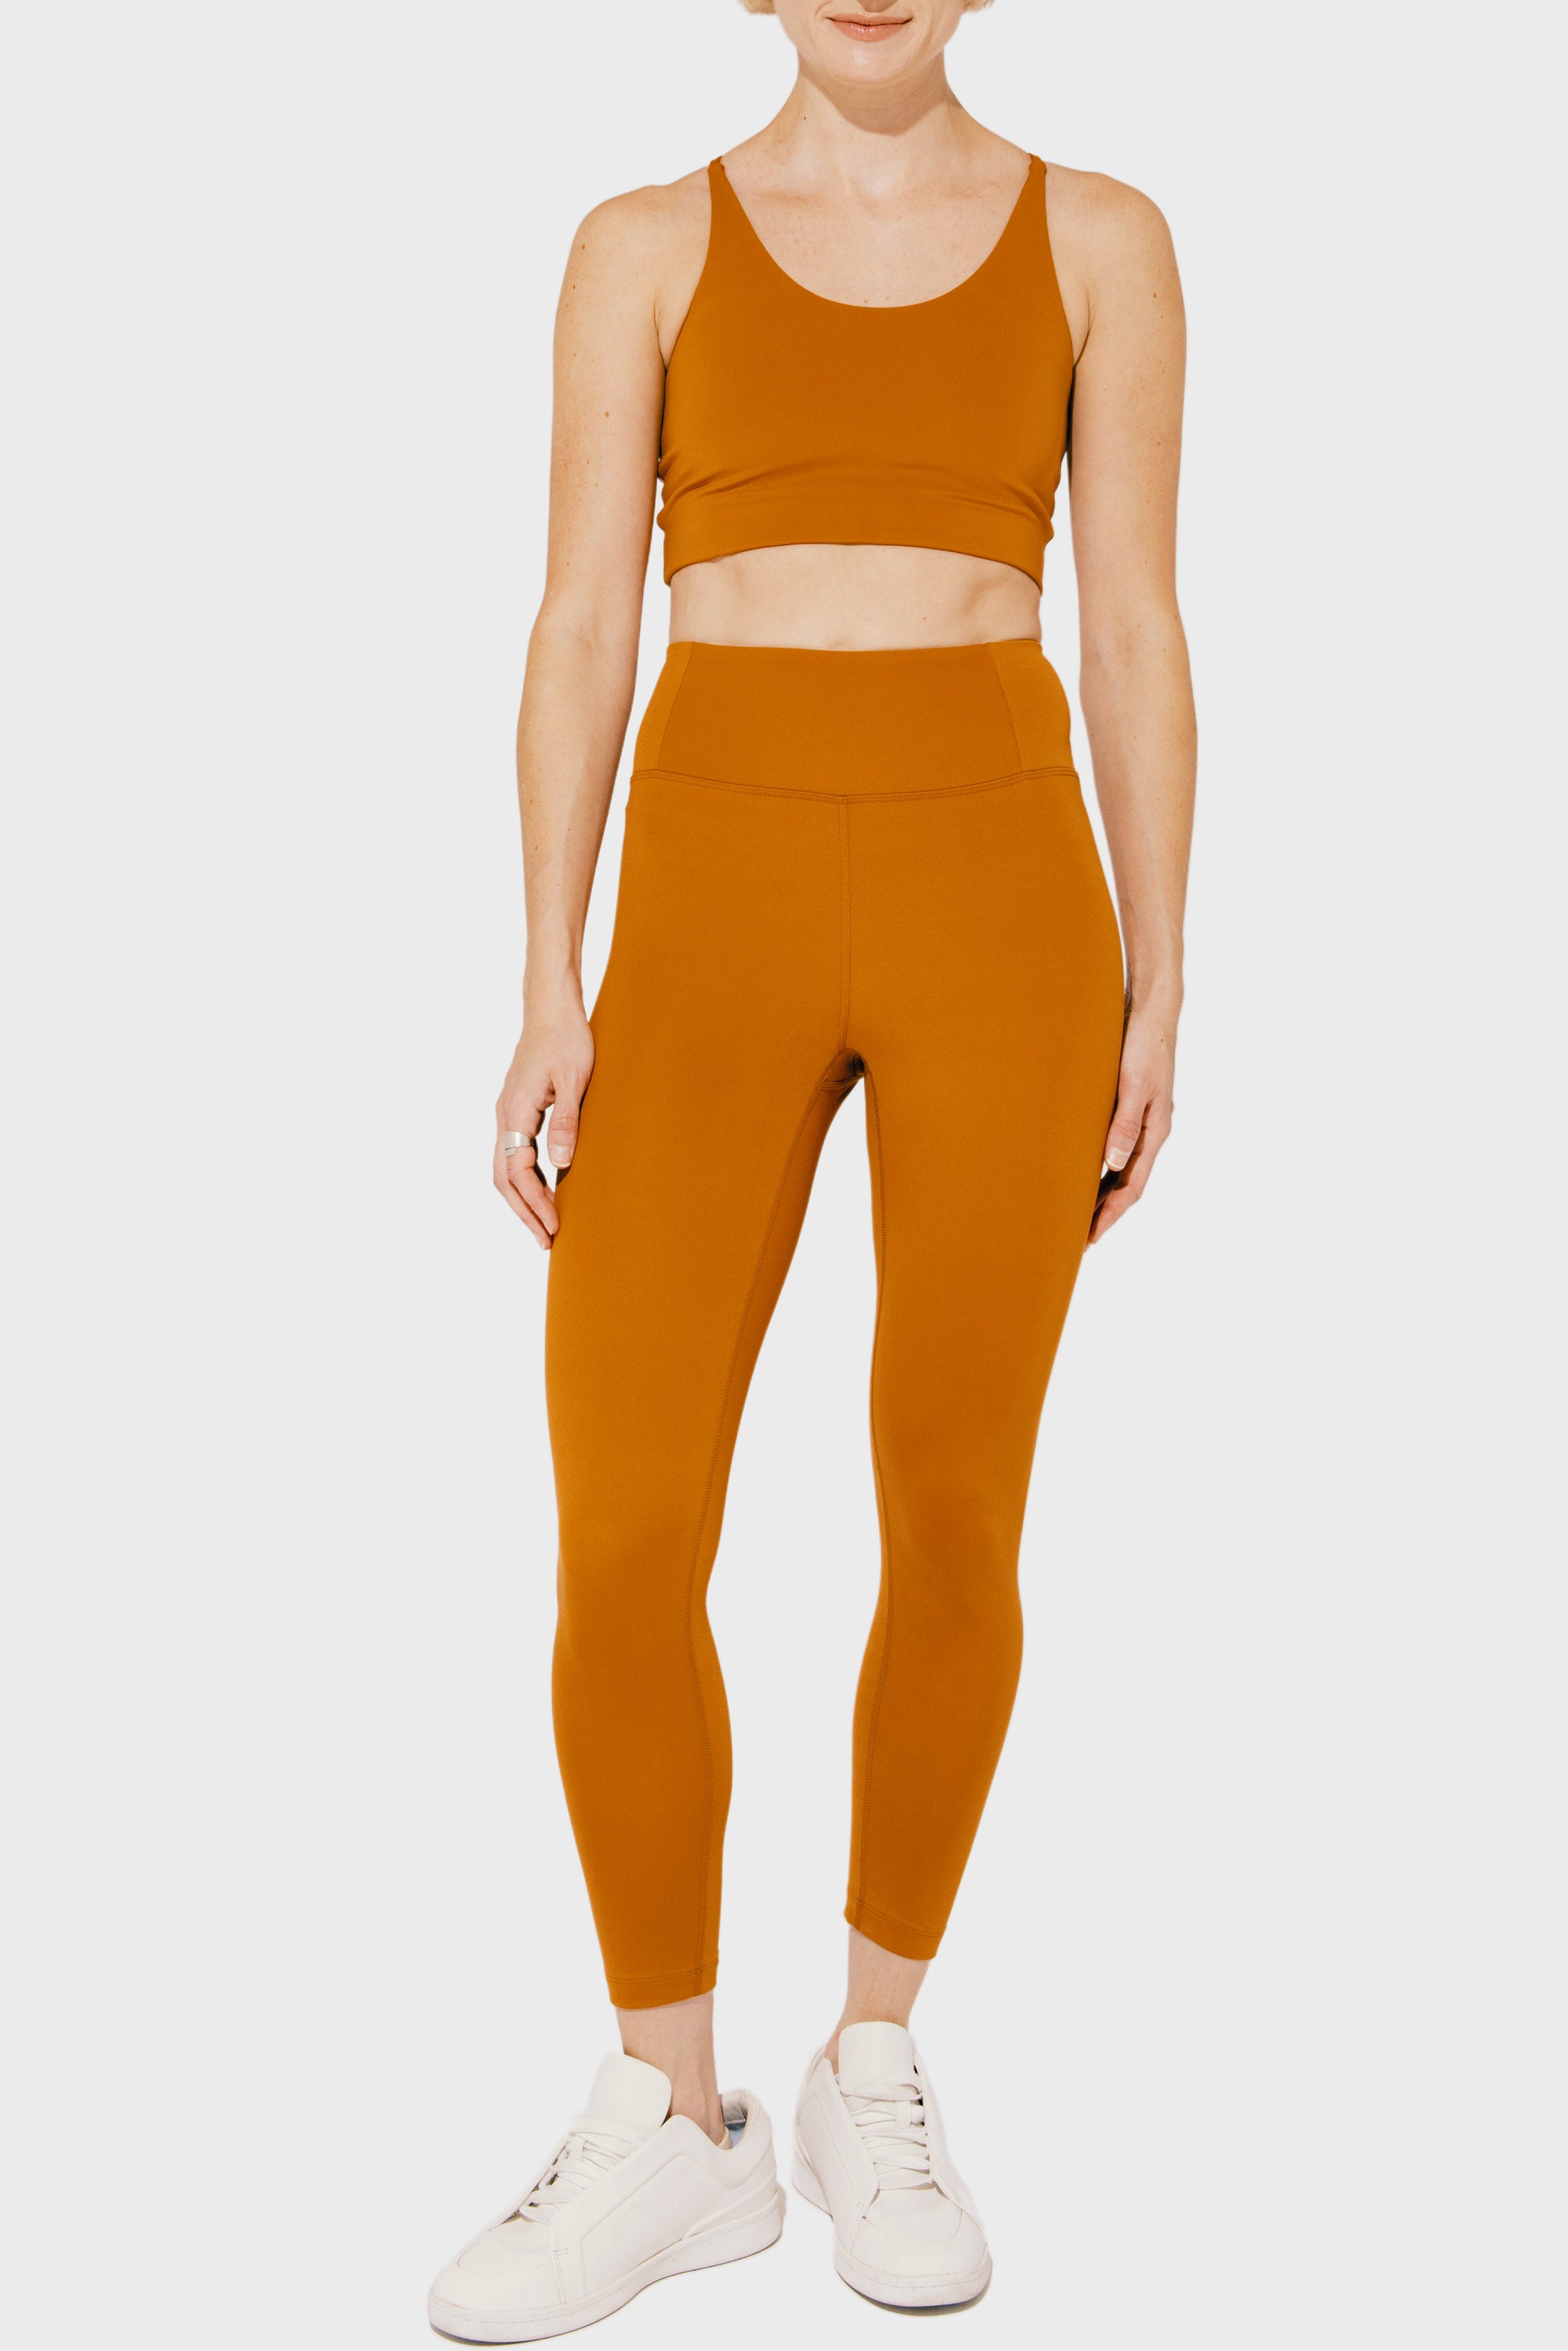 FLOAT Seamless High Rise Legging in Spice